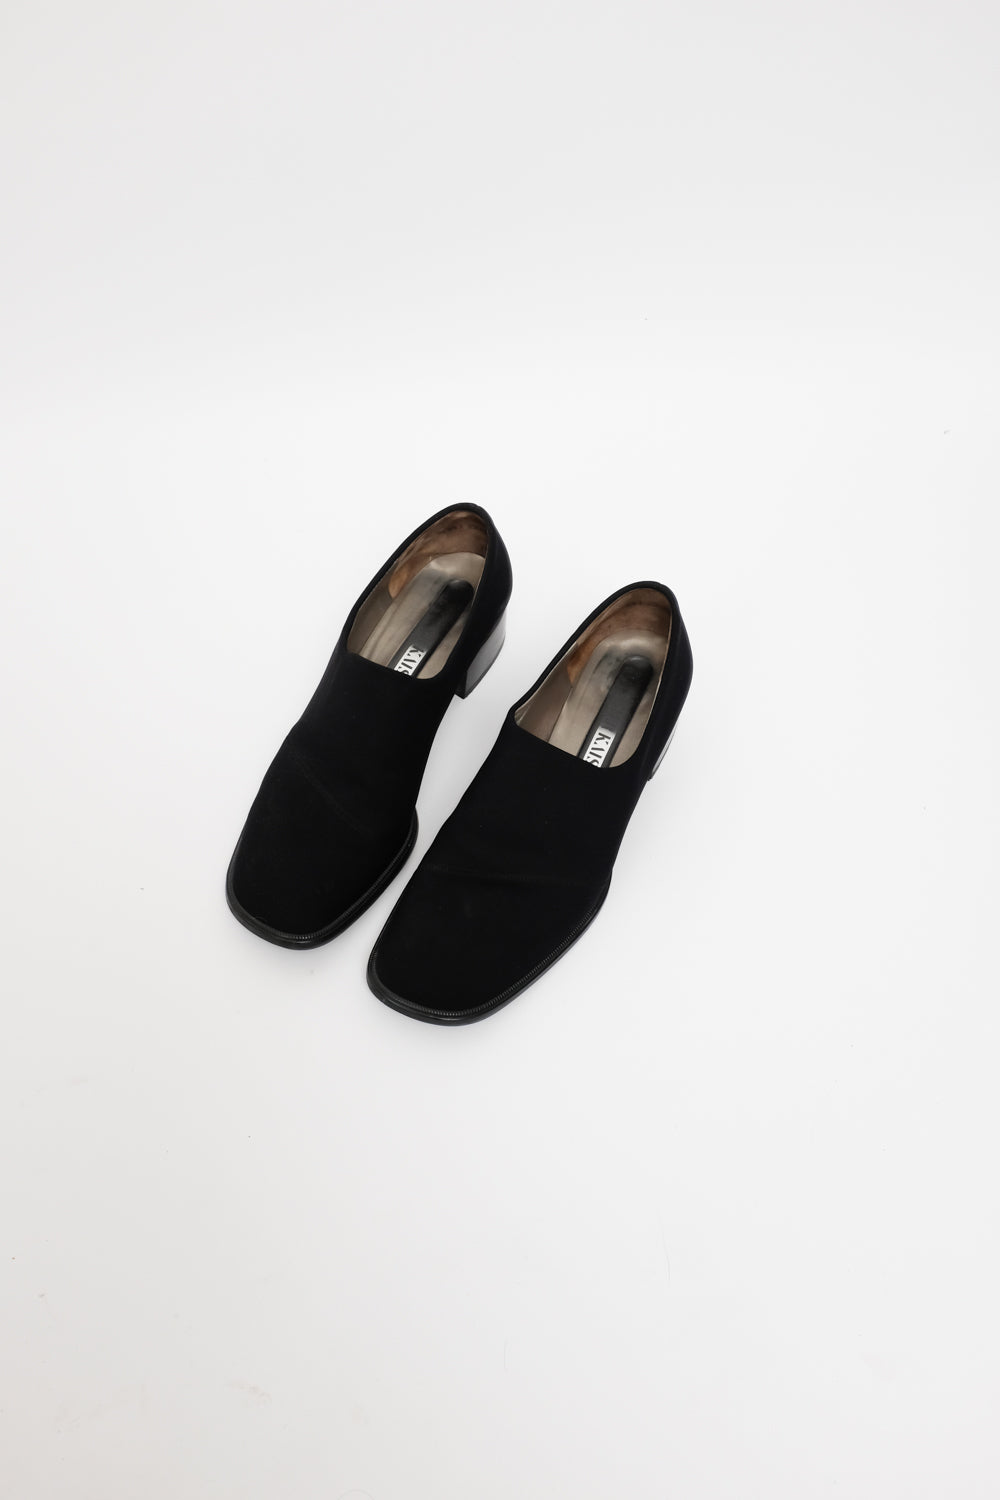 CLEAN 38 39 MINIMALIST BLACK LOAFER SHOES